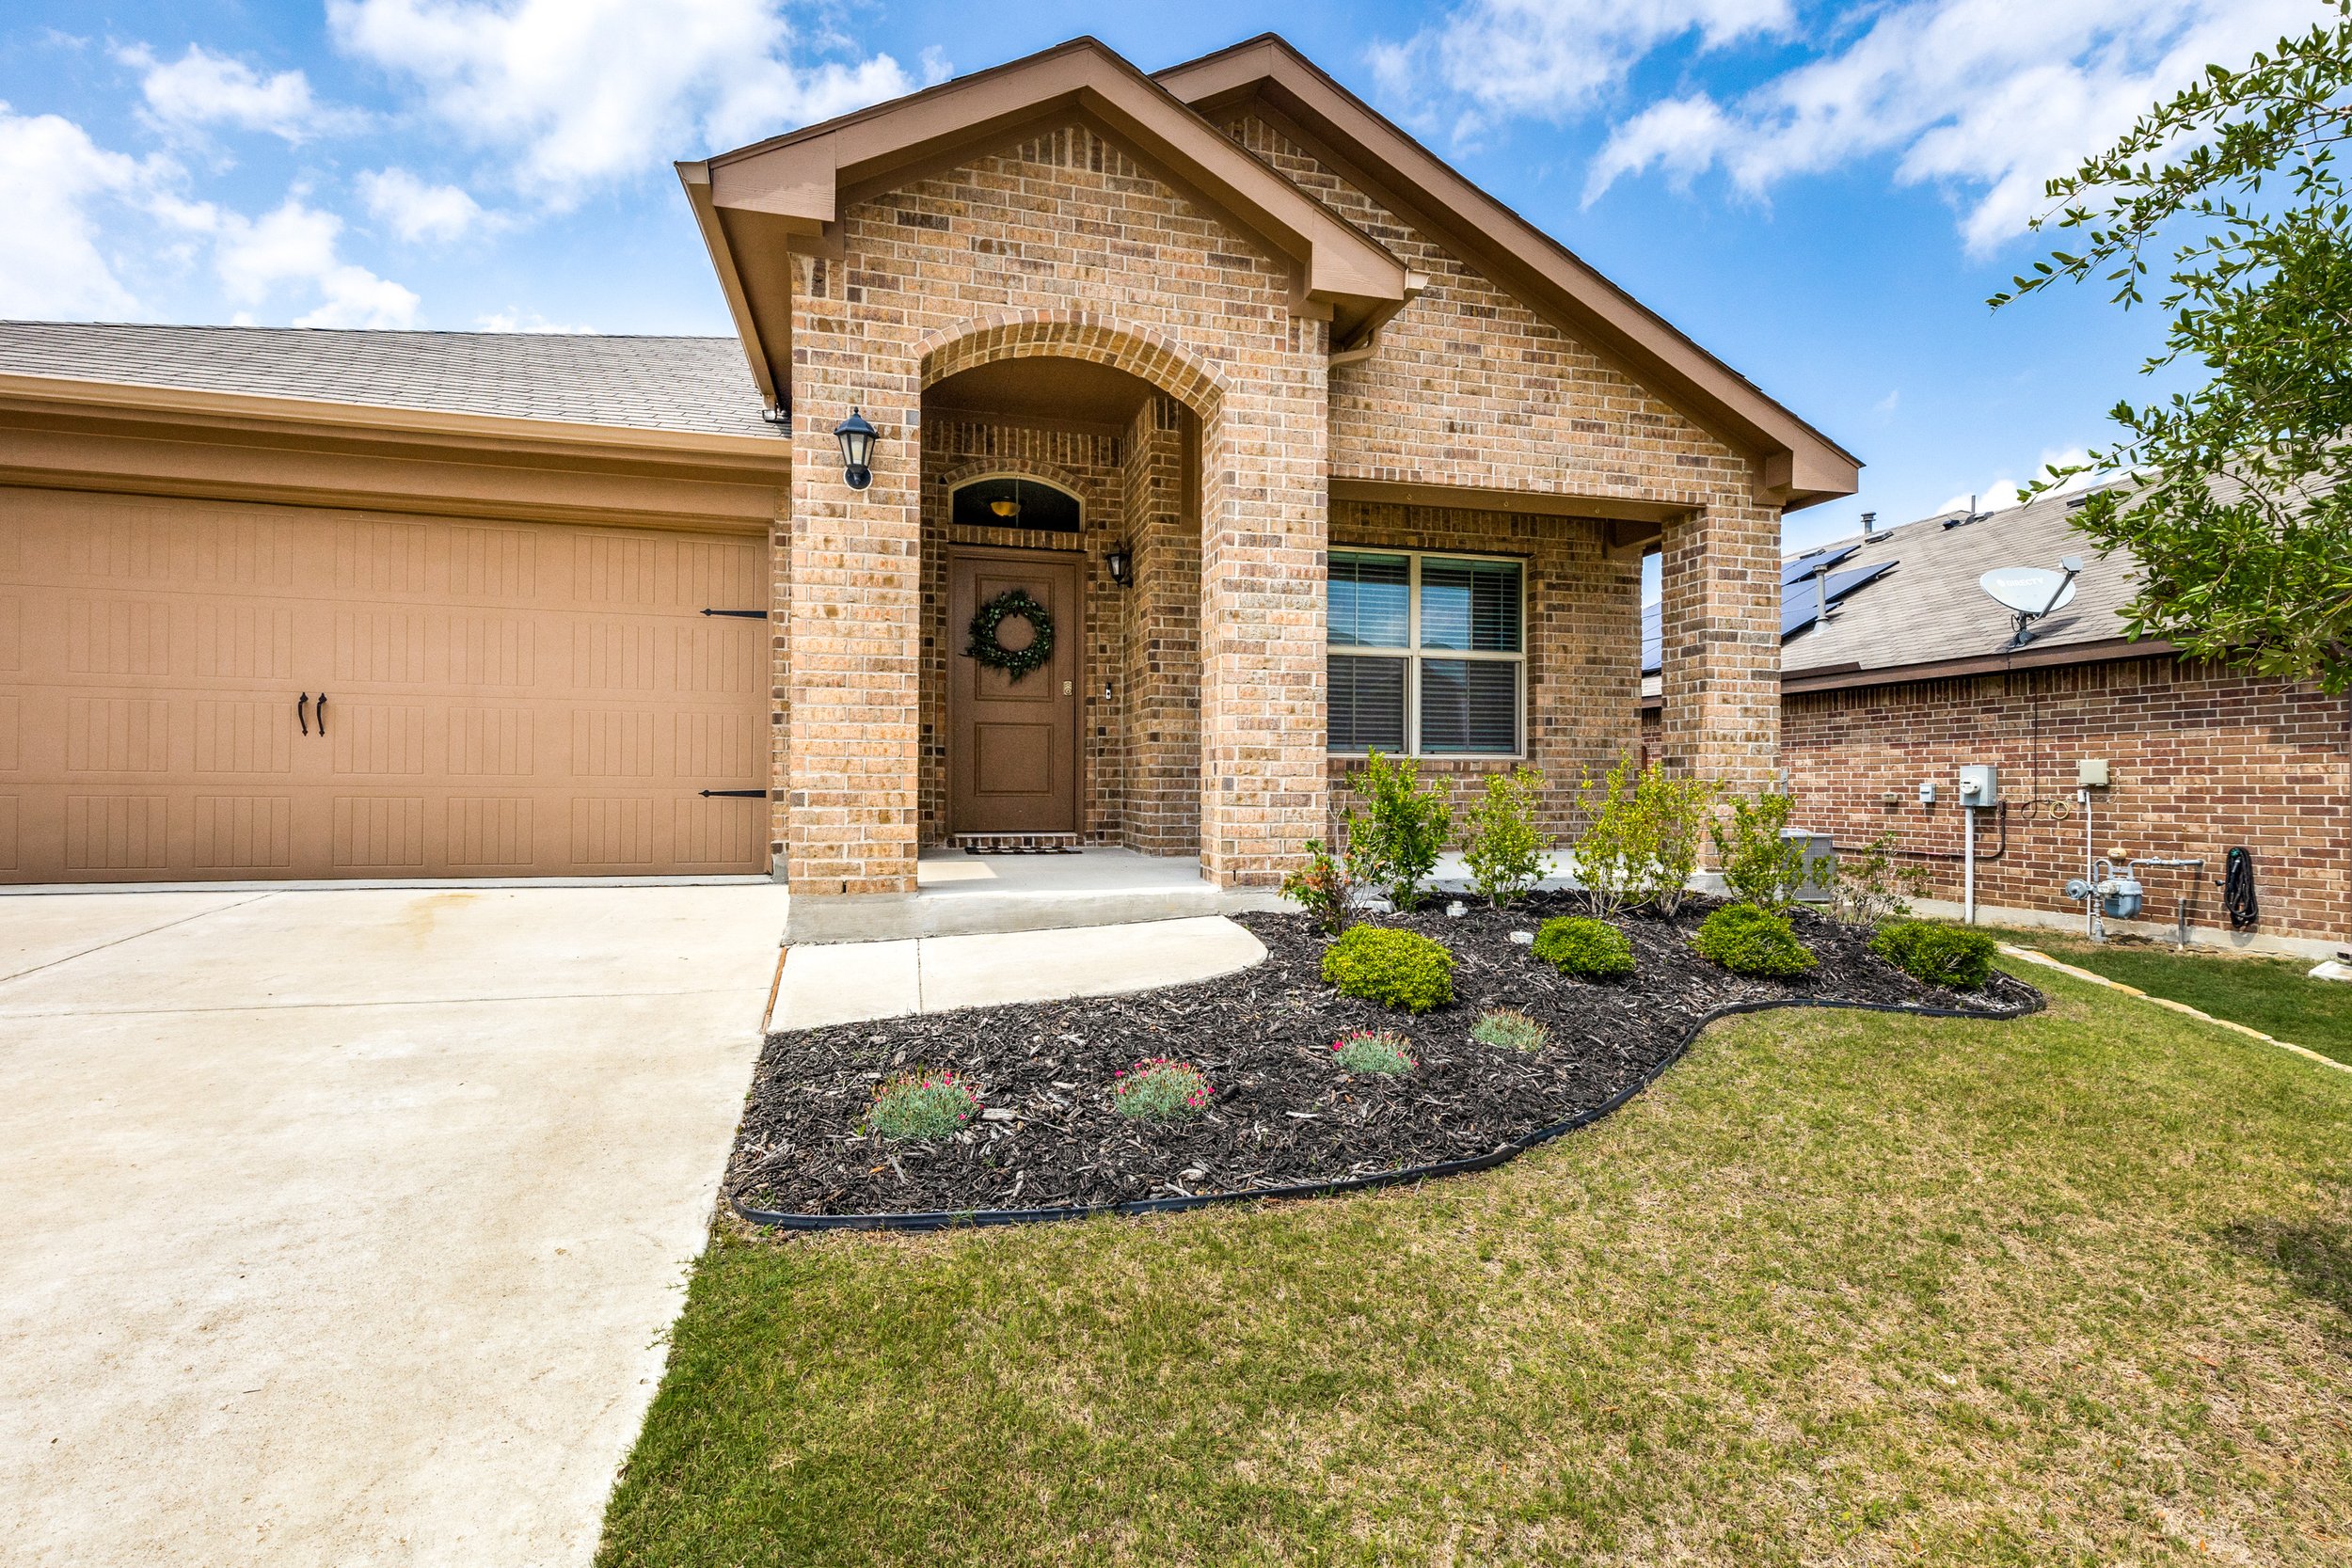 10104-clemmons-rd-fort-worth-tx-76108-High-Res-3.jpg